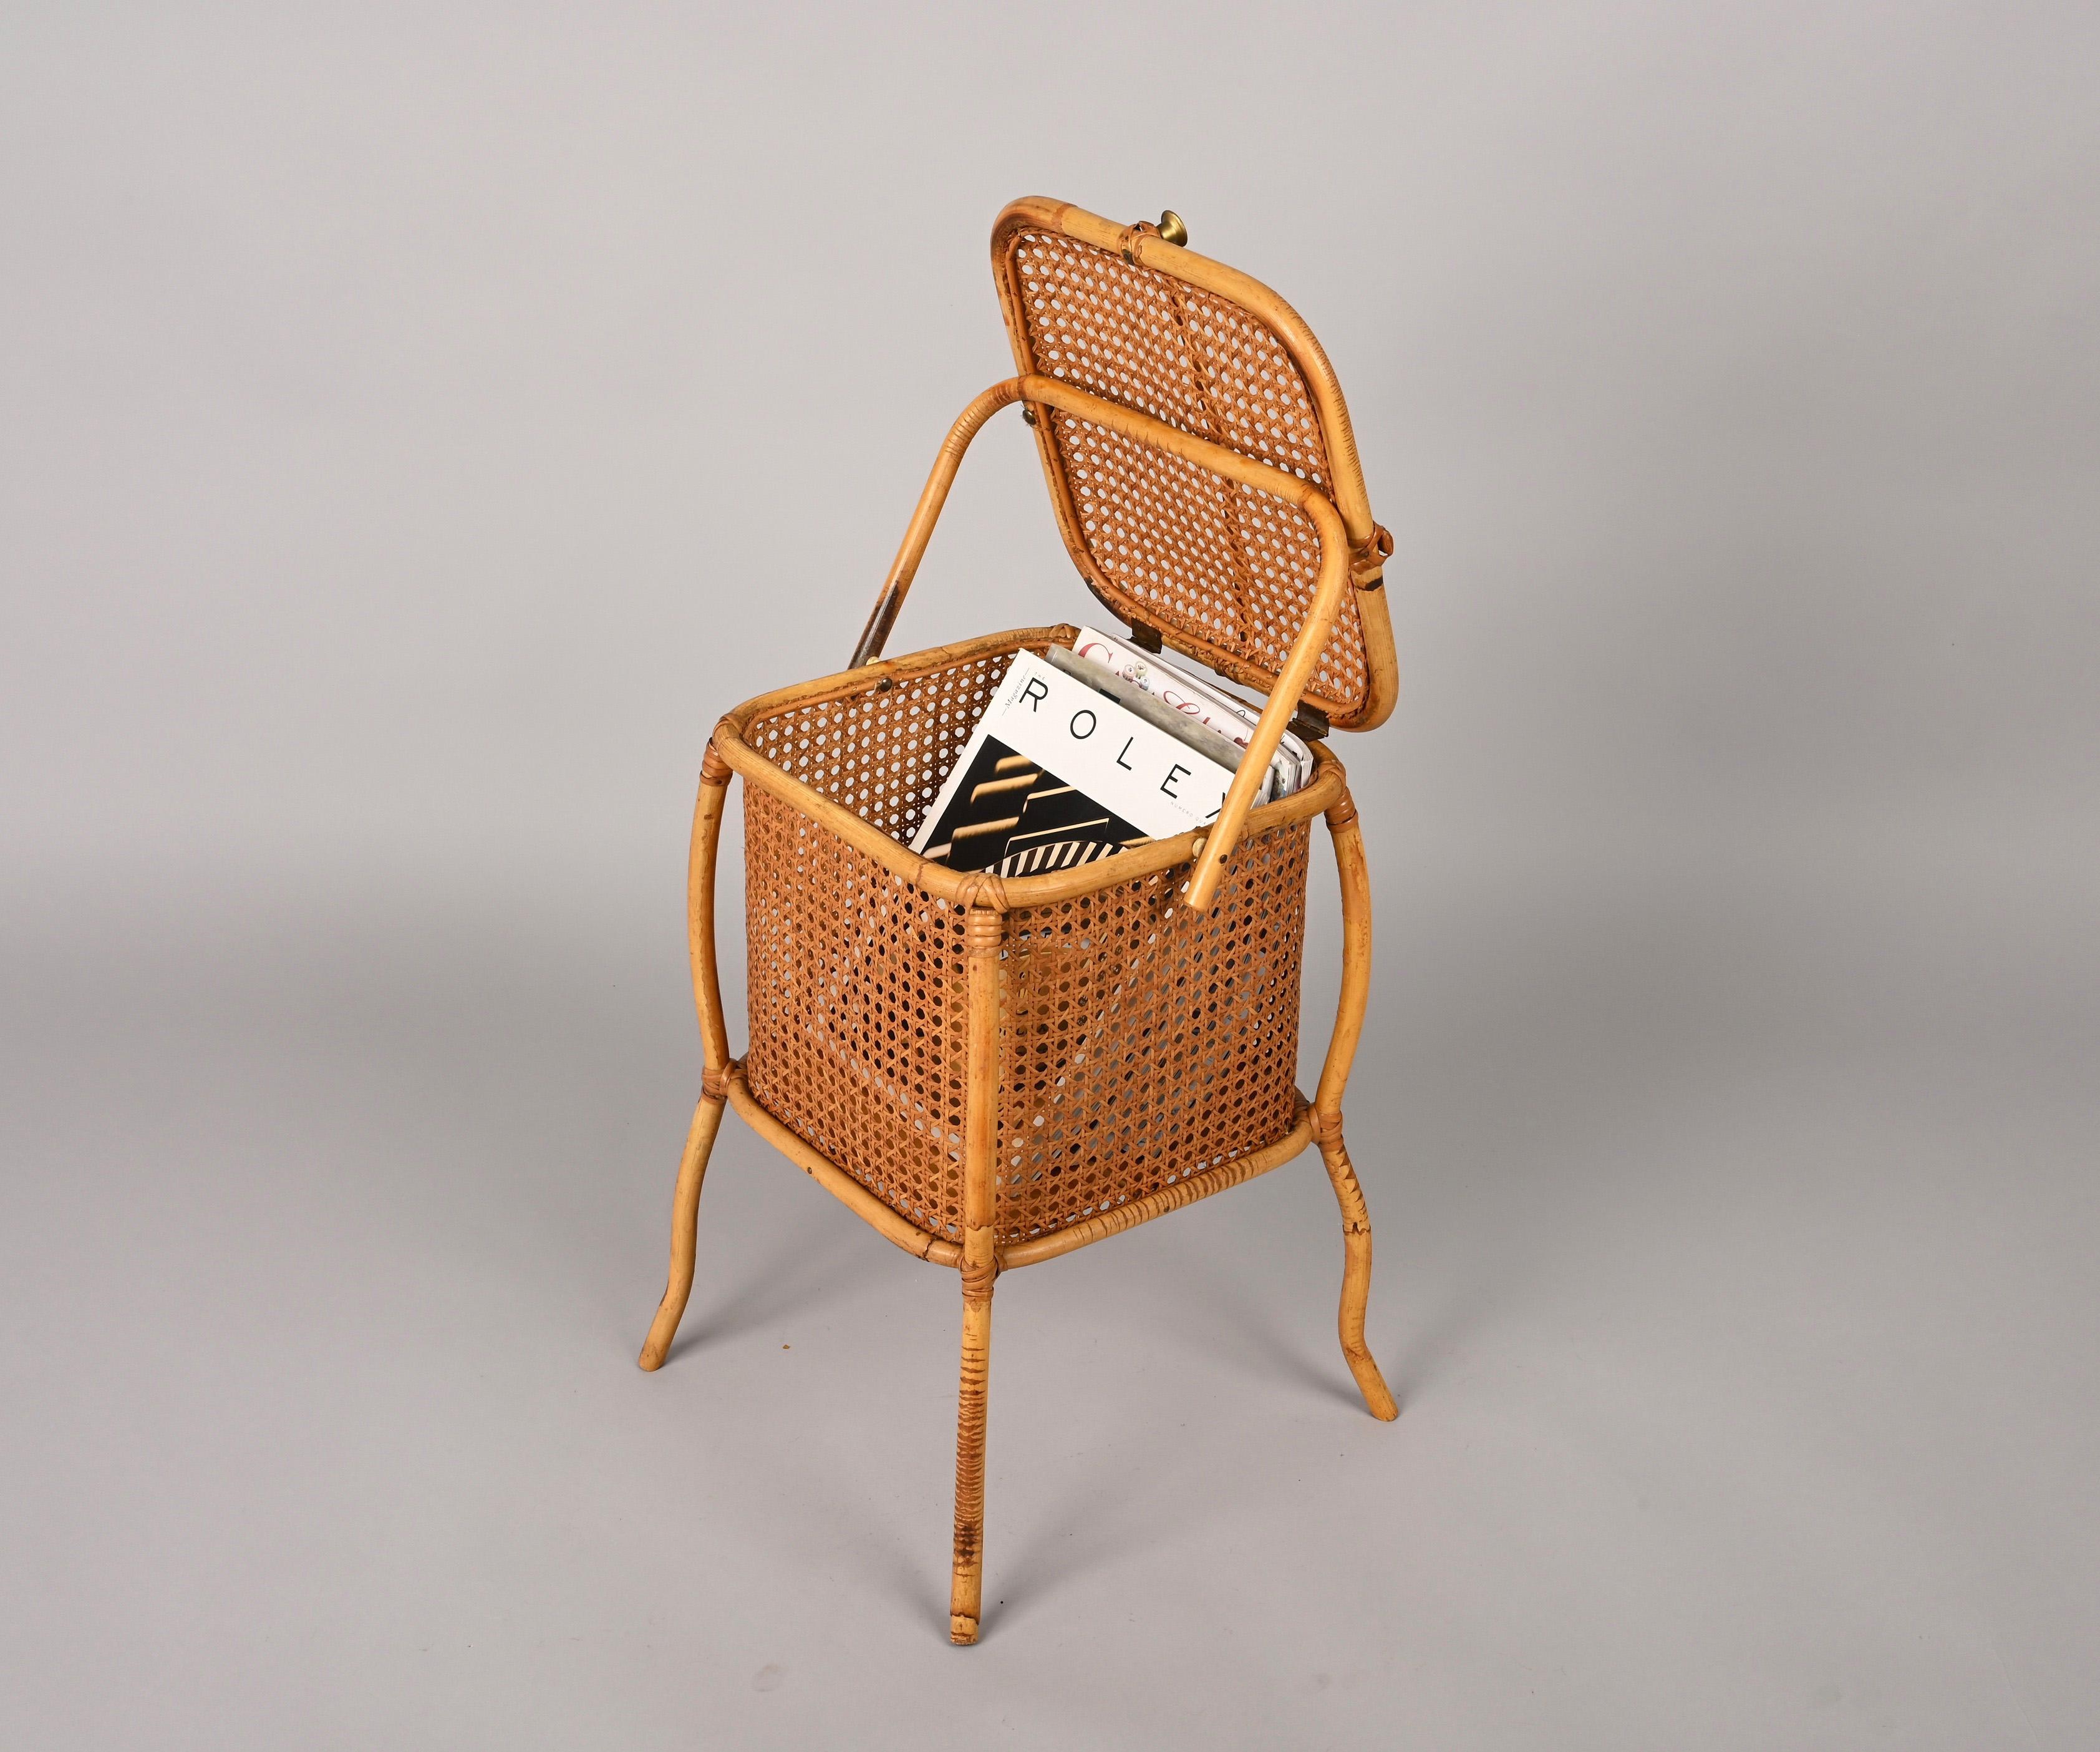 Midcentury Bamboo, Wicker and Vienna Straw Cubic Italian Magazine Basket, 1960s For Sale 13